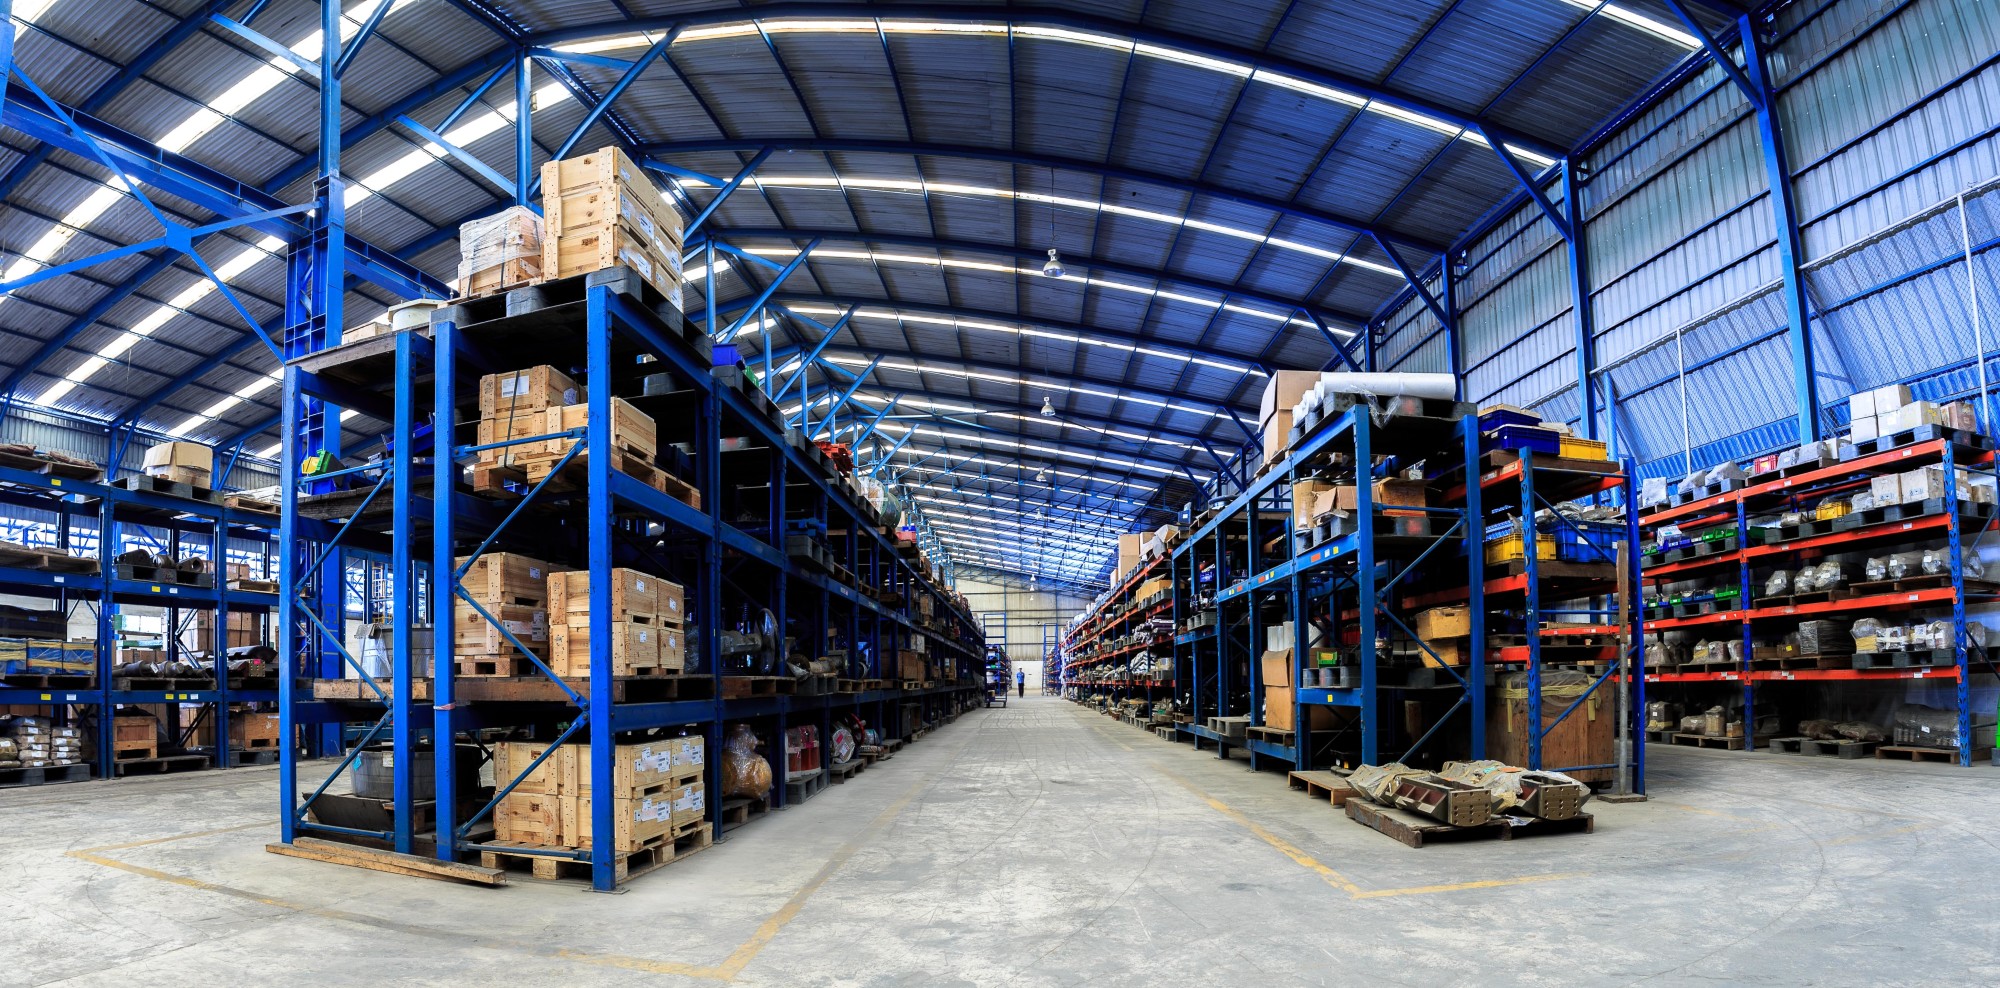 Warehouse for rent in Ayutthaya